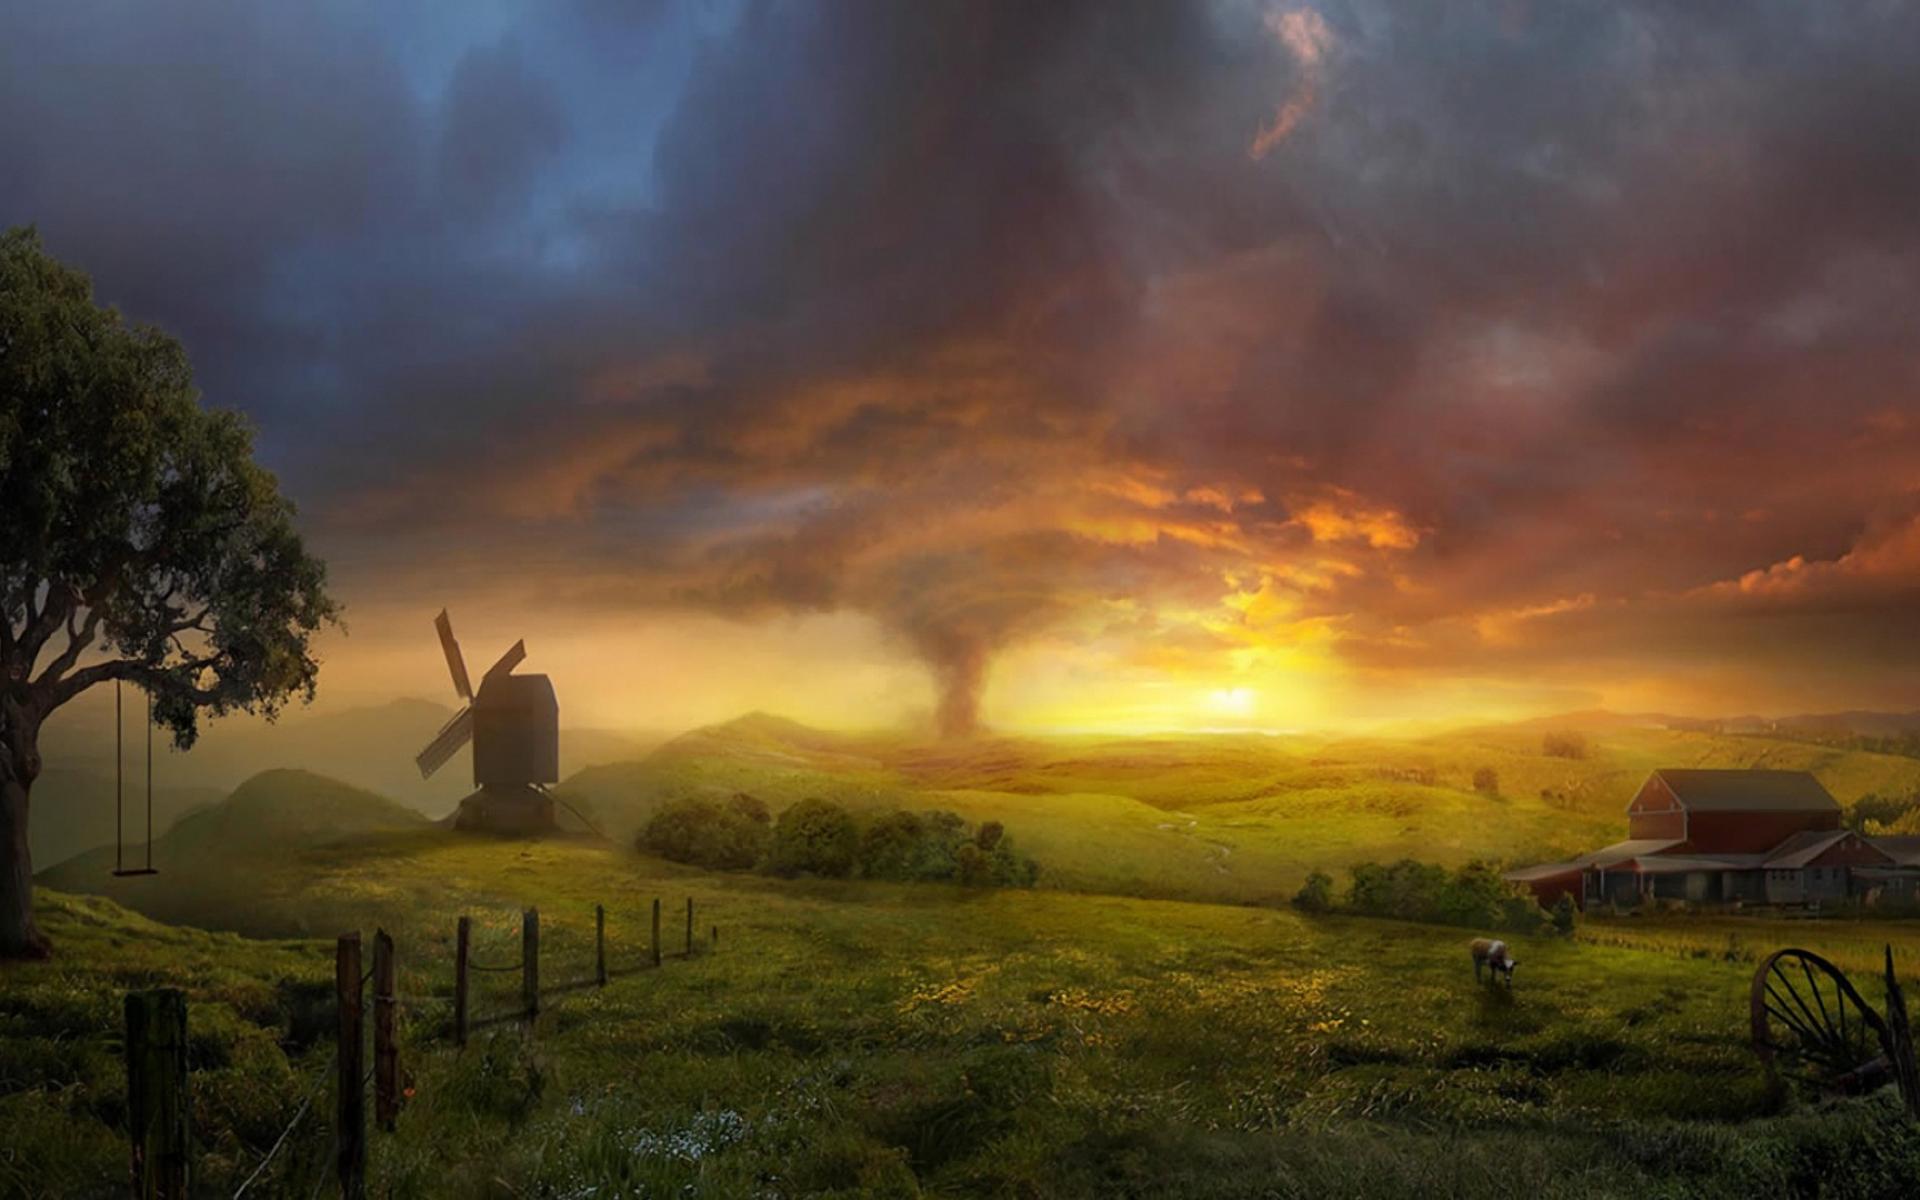 vertical wallpaper farm, artistic, landscape, country, countryside, painting, tornado